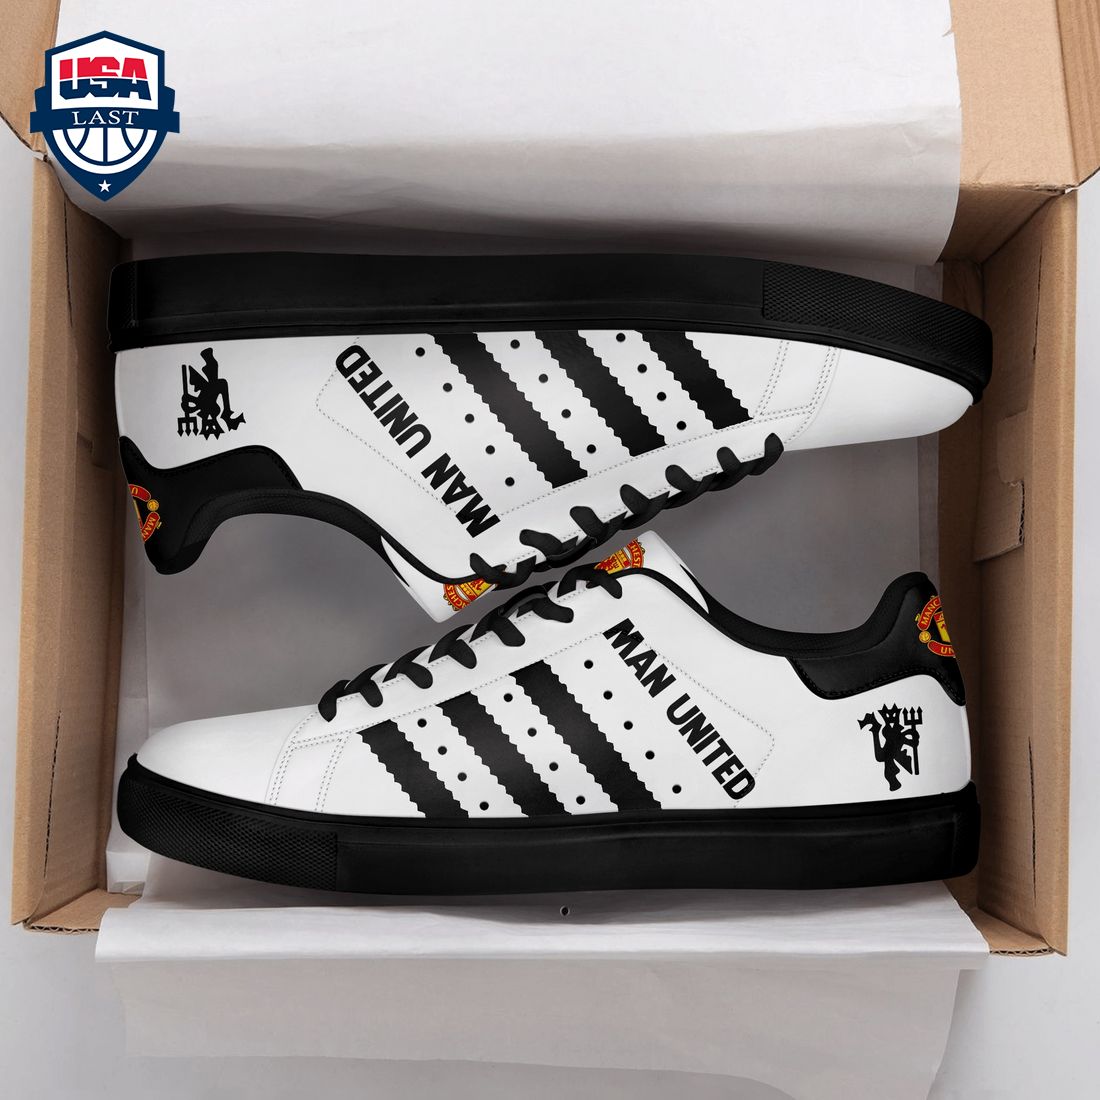 manchester-united-fc-black-stripes-style-3-stan-smith-low-top-shoes-1-AsxCP.jpg